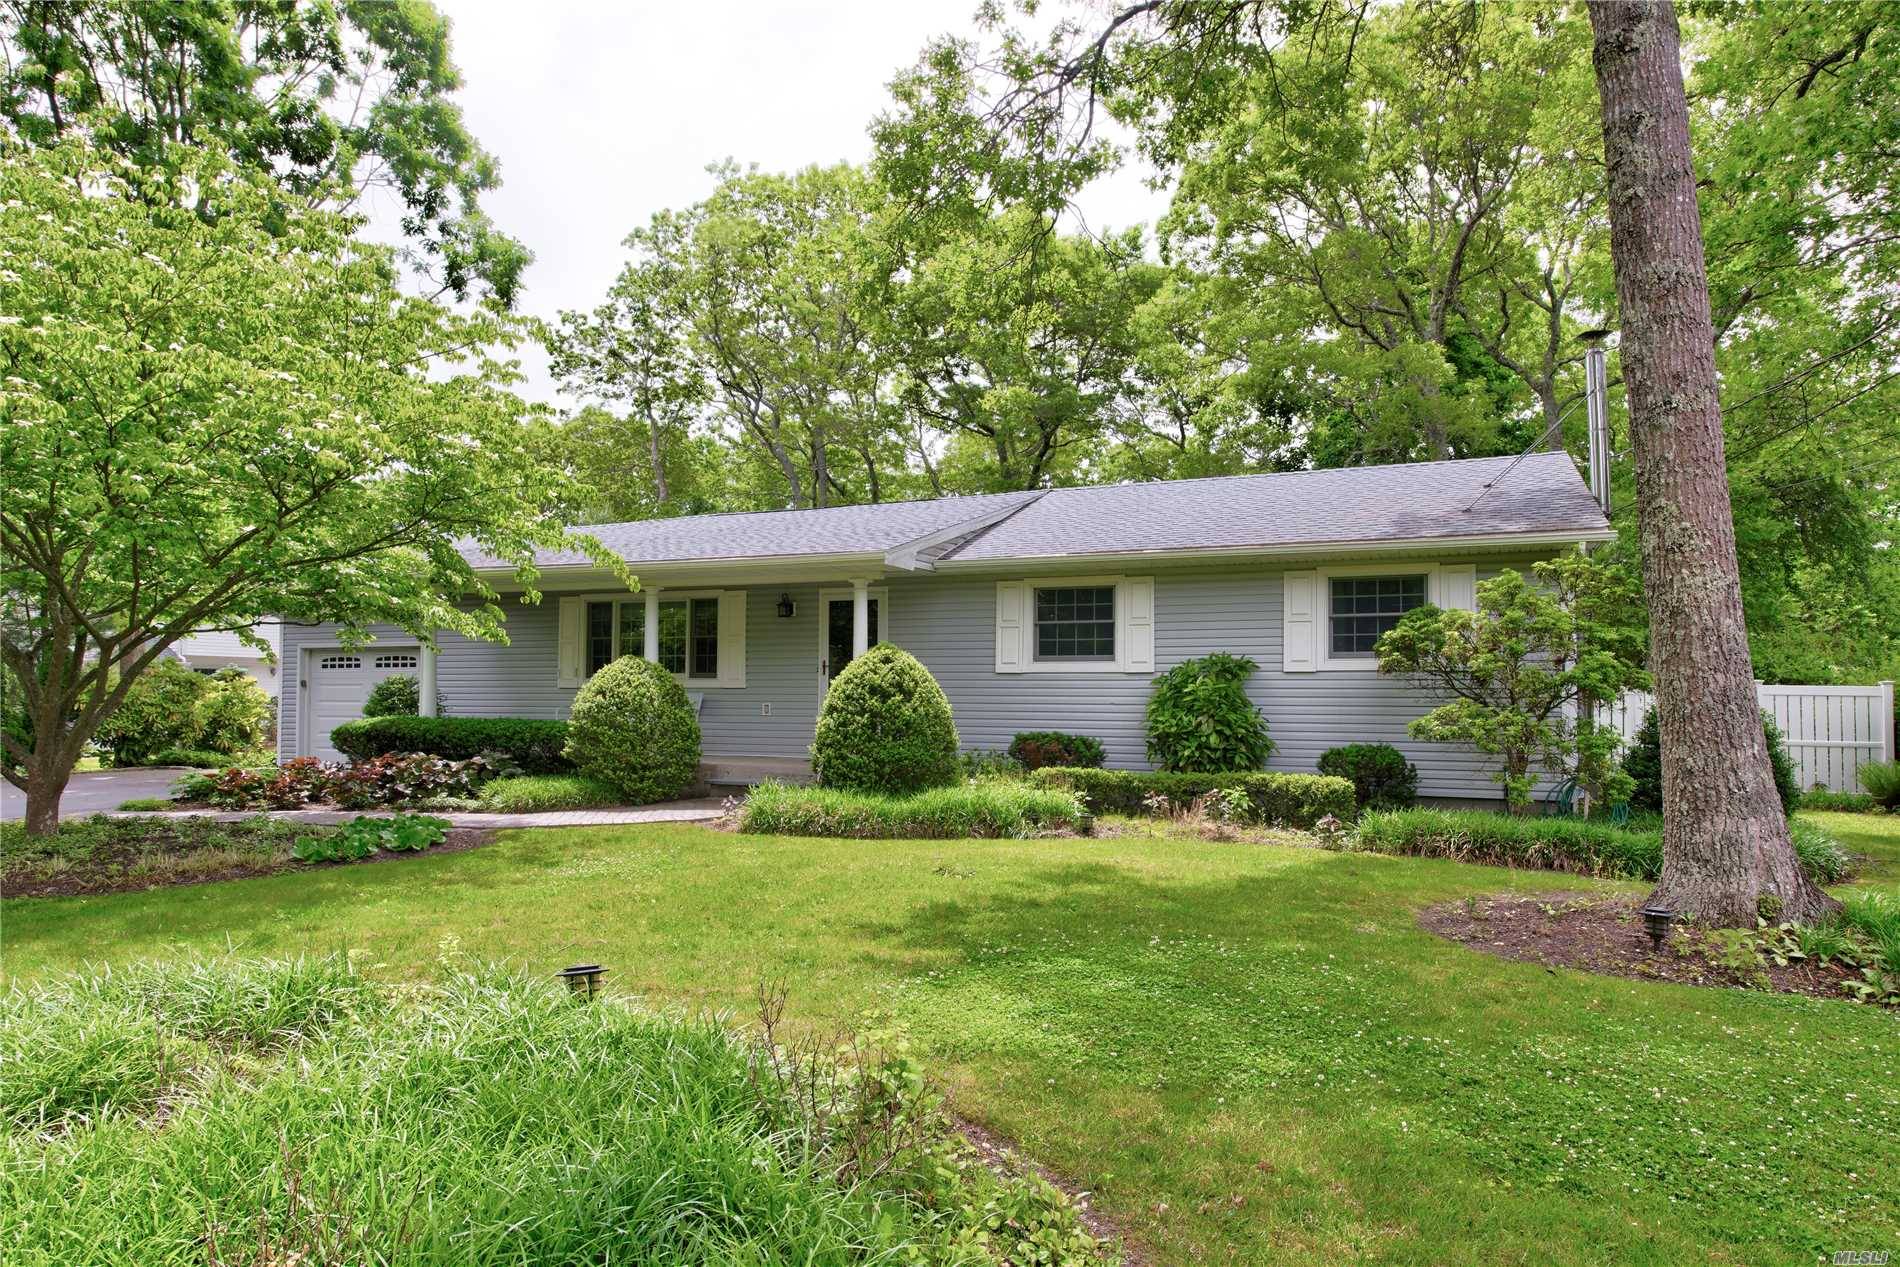 Located South Of The Highway In The Desirable Bay Estates Neighborhood Of East Quogue.